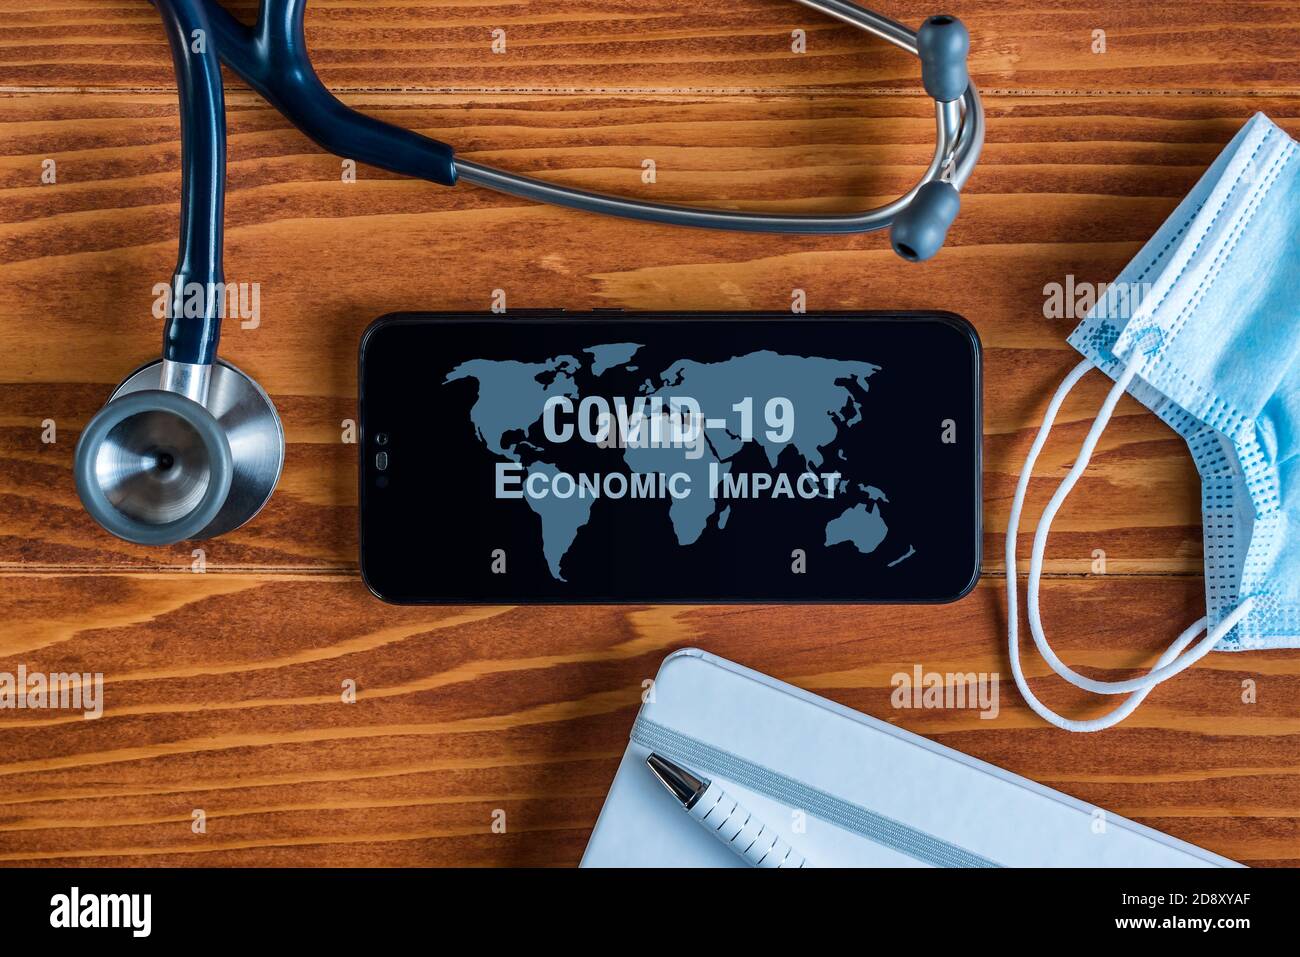 Coronavirus COVID-19 concept: a smartphone sorrounded by a stethoscope, a medical mask and other objects with a world map and an Economic Impact text Stock Photo